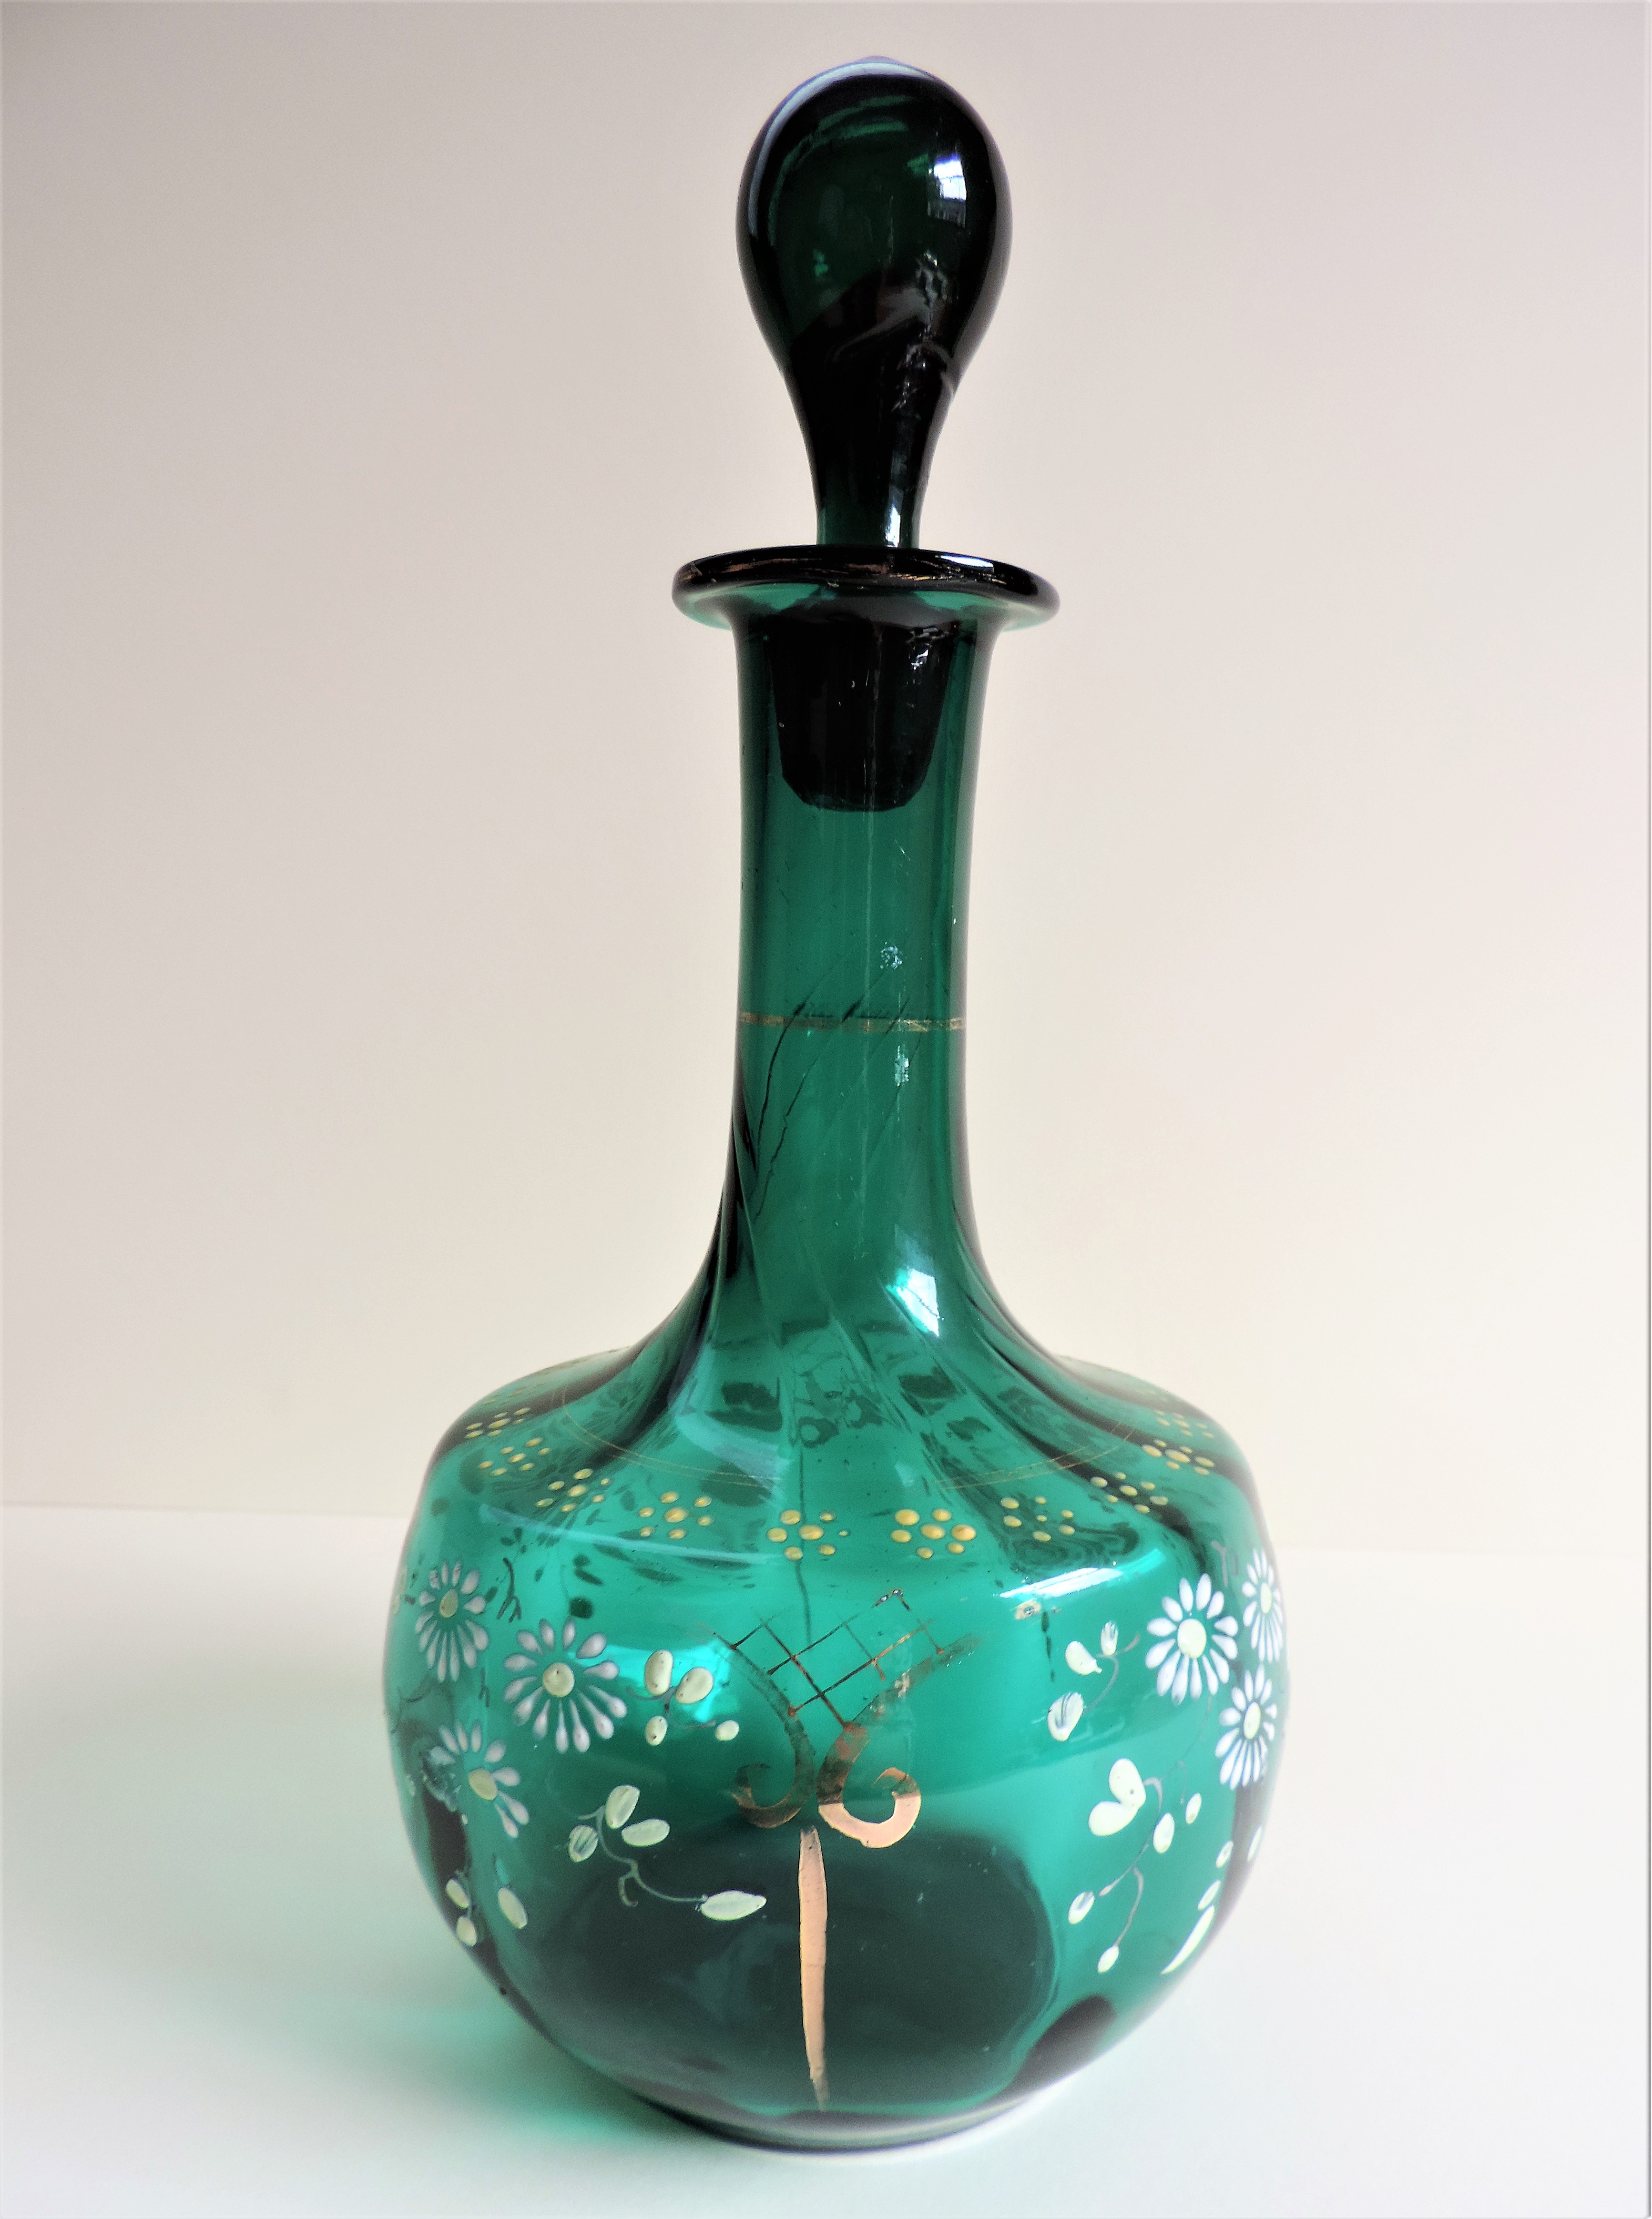 Vintage Hand Painted Decanter - Image 6 of 7